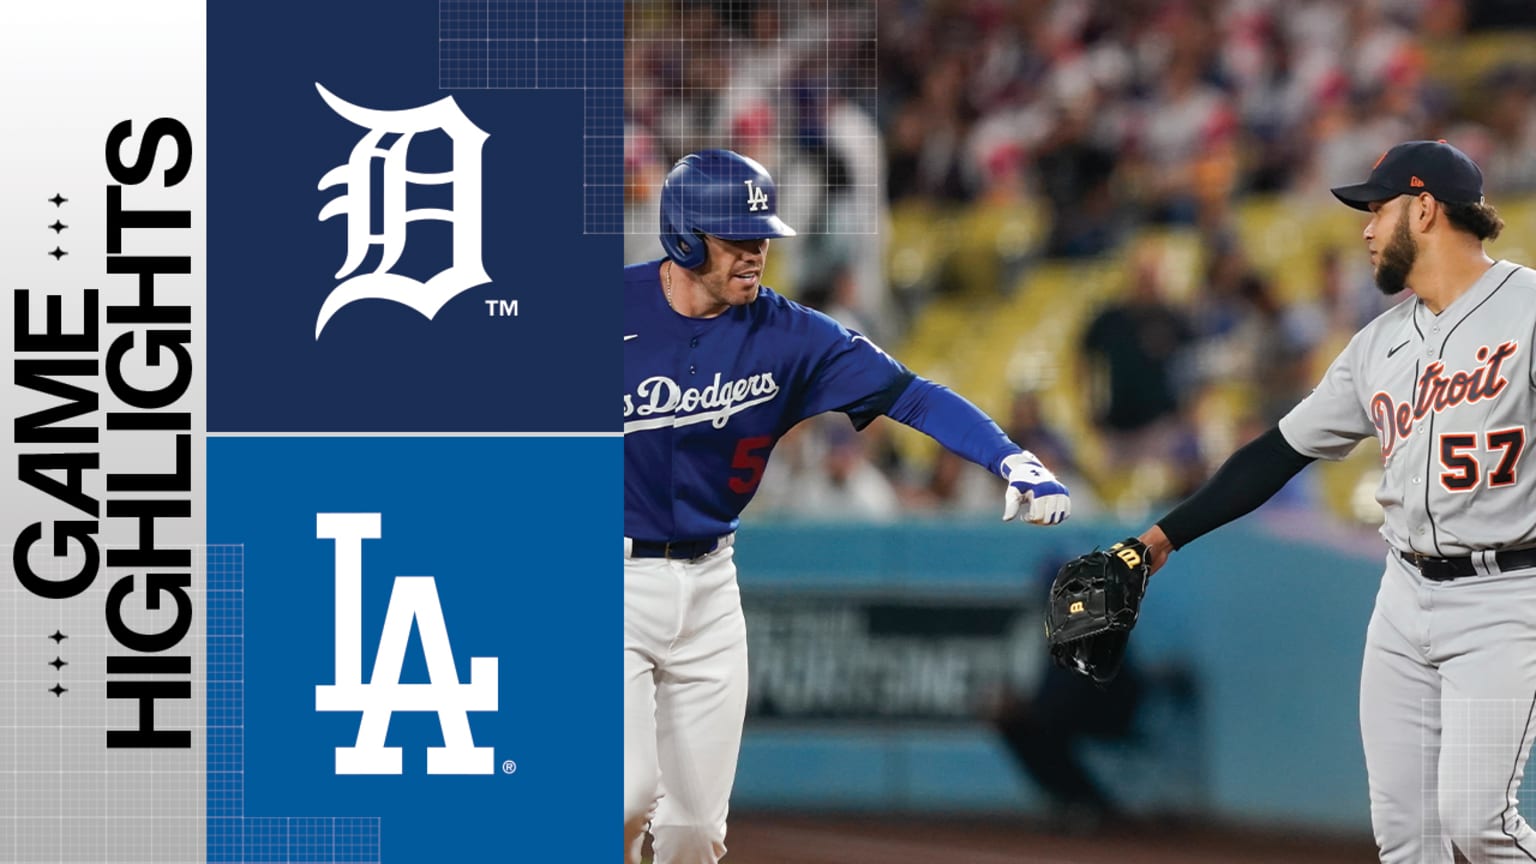 JD Martinez Los Angeles Dodgers Next Stop Bobblehead Officially Licensed by MLB